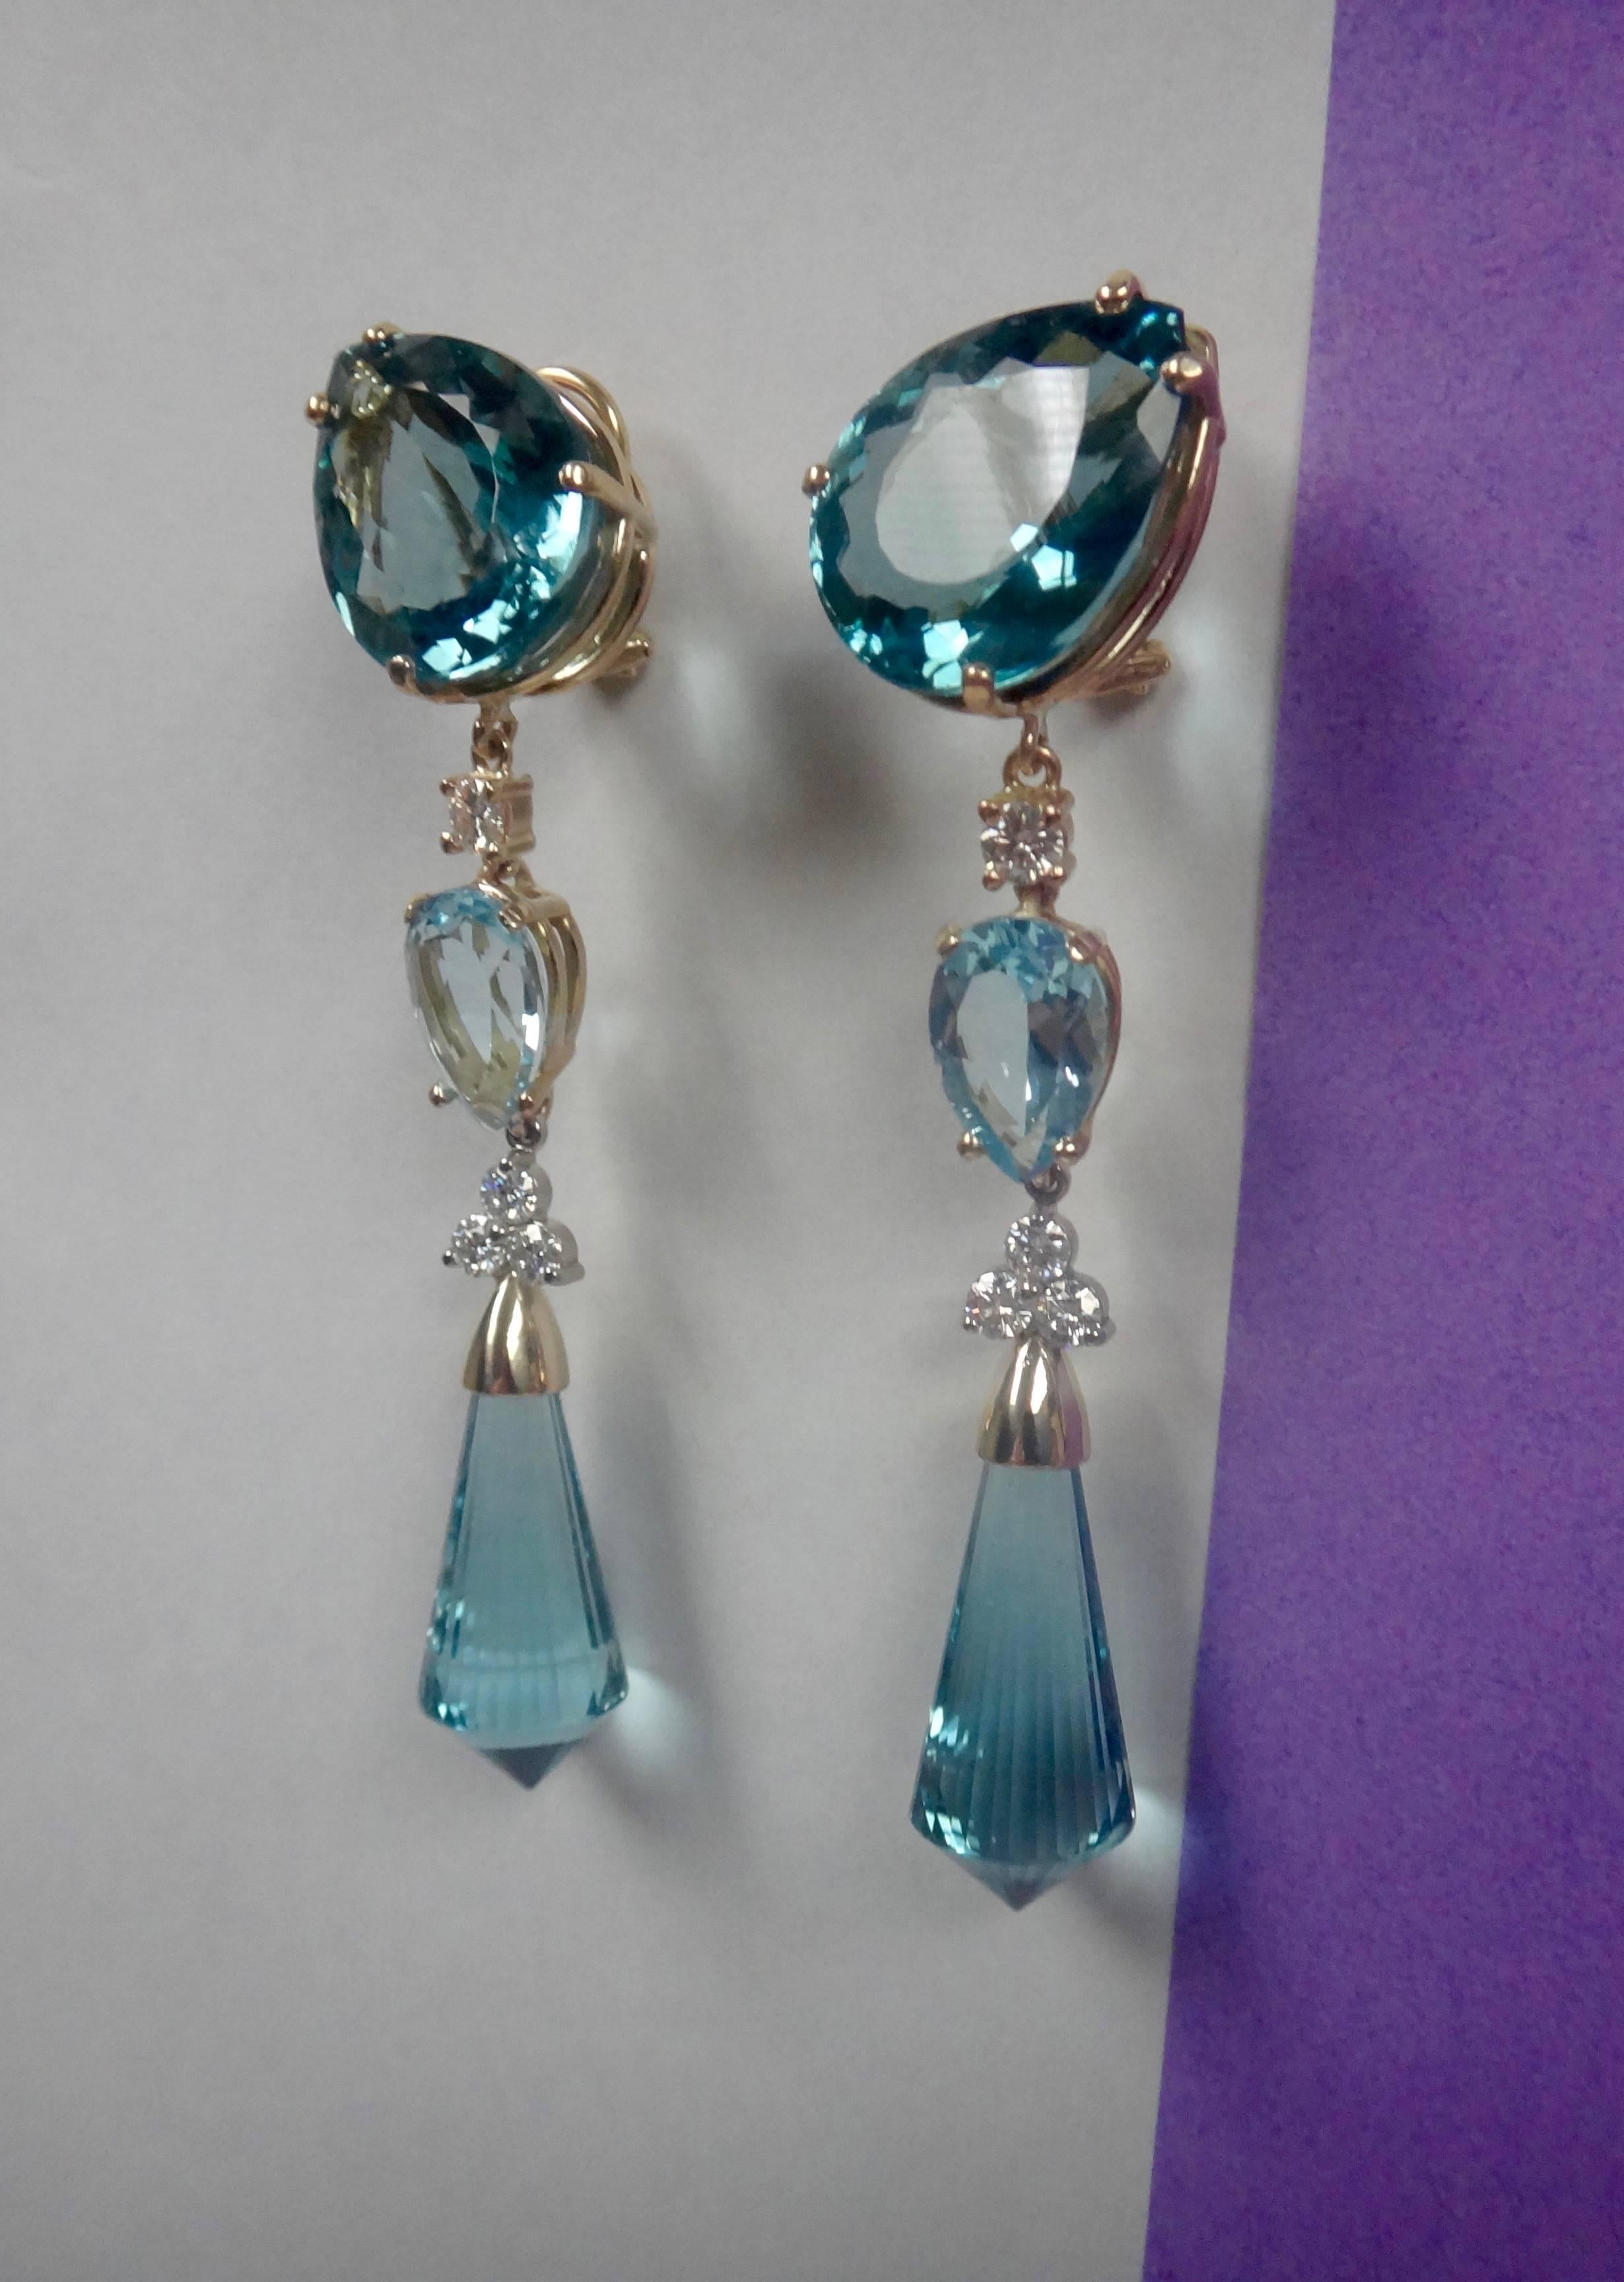 Three different shades of blue topaz are decorated with diamonds in these dramatic dangle earrings.  The briolette are lavishly faceted and terminate in points rather that in the more traditional rounded shape.  There one-of-a-kind earrings come